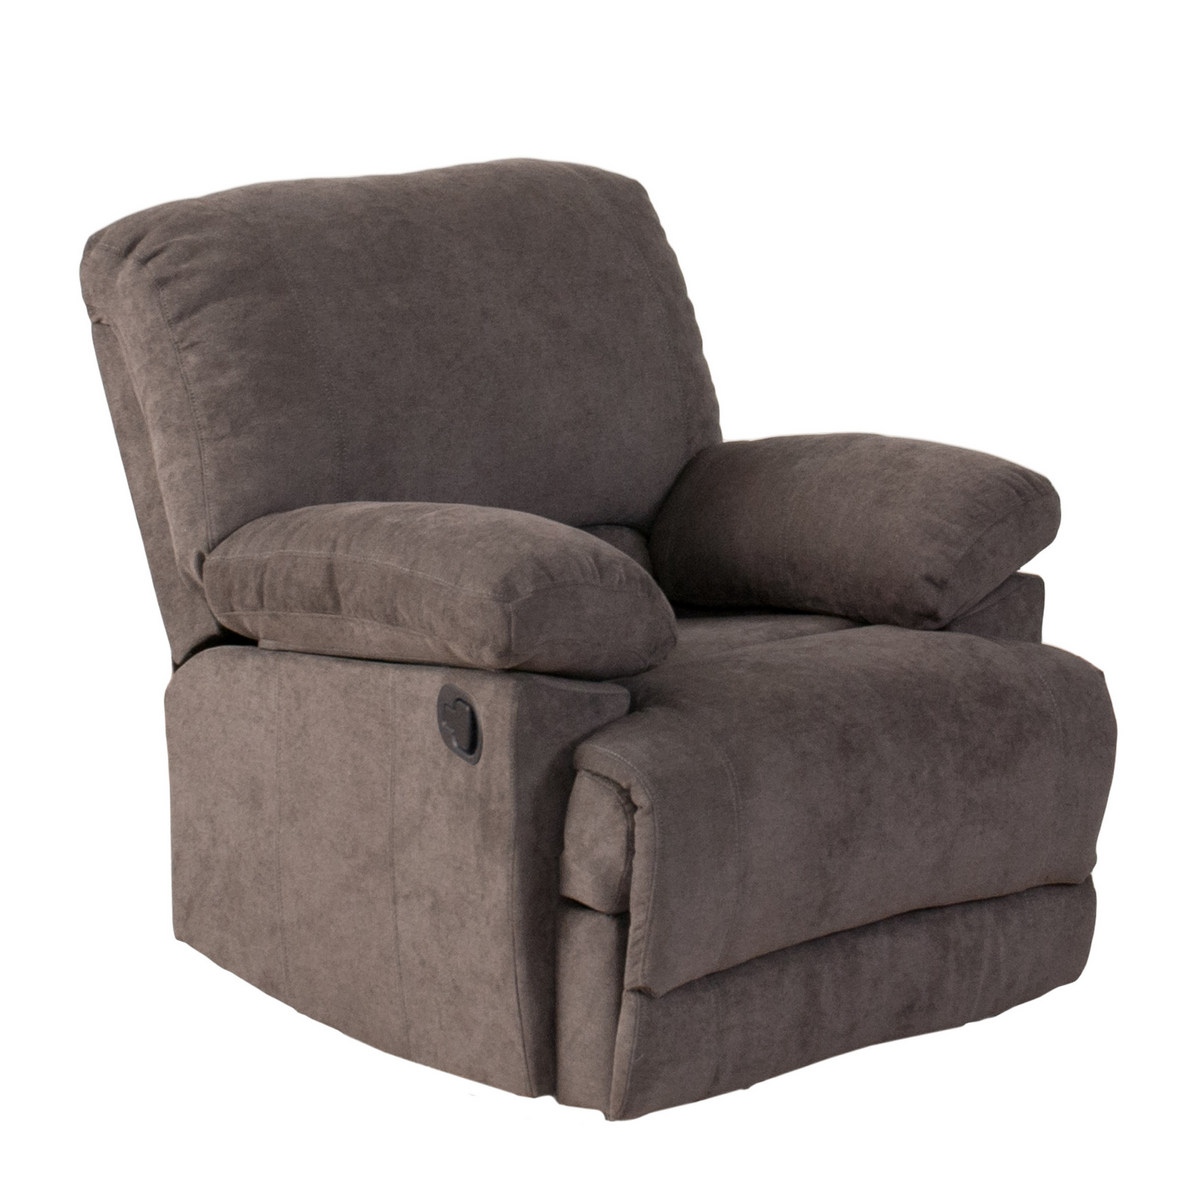 CorLiving LZY-331-R Lea Grey Chenille Fabric Recliner - CorLiving Recliners